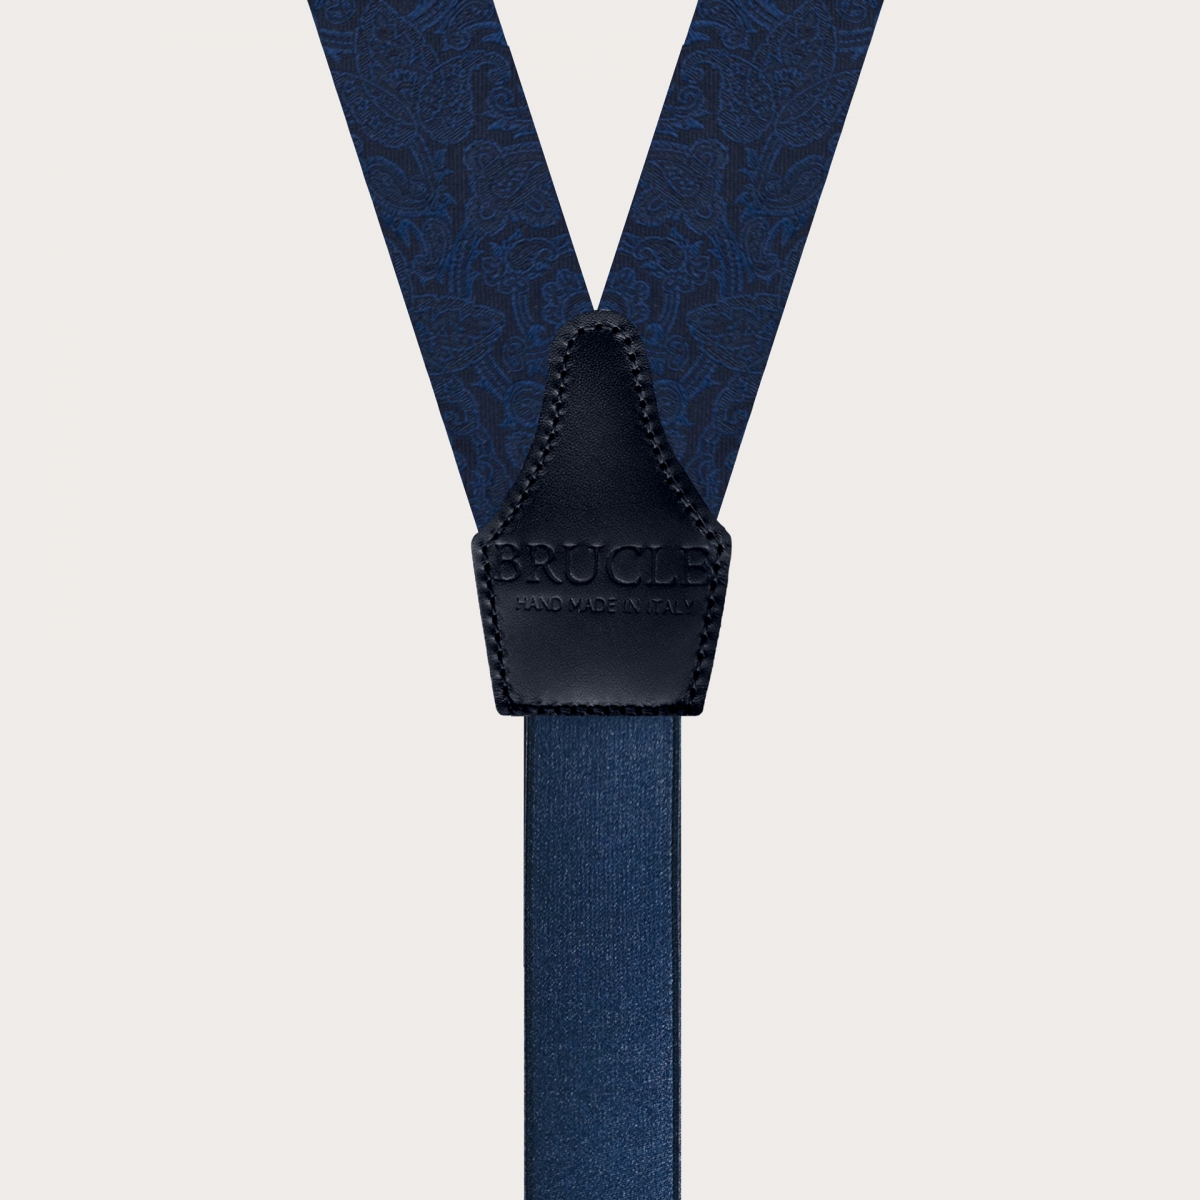 BRUCLE Silk braces with buttonholes, tone-on-tone blue paisley pattern